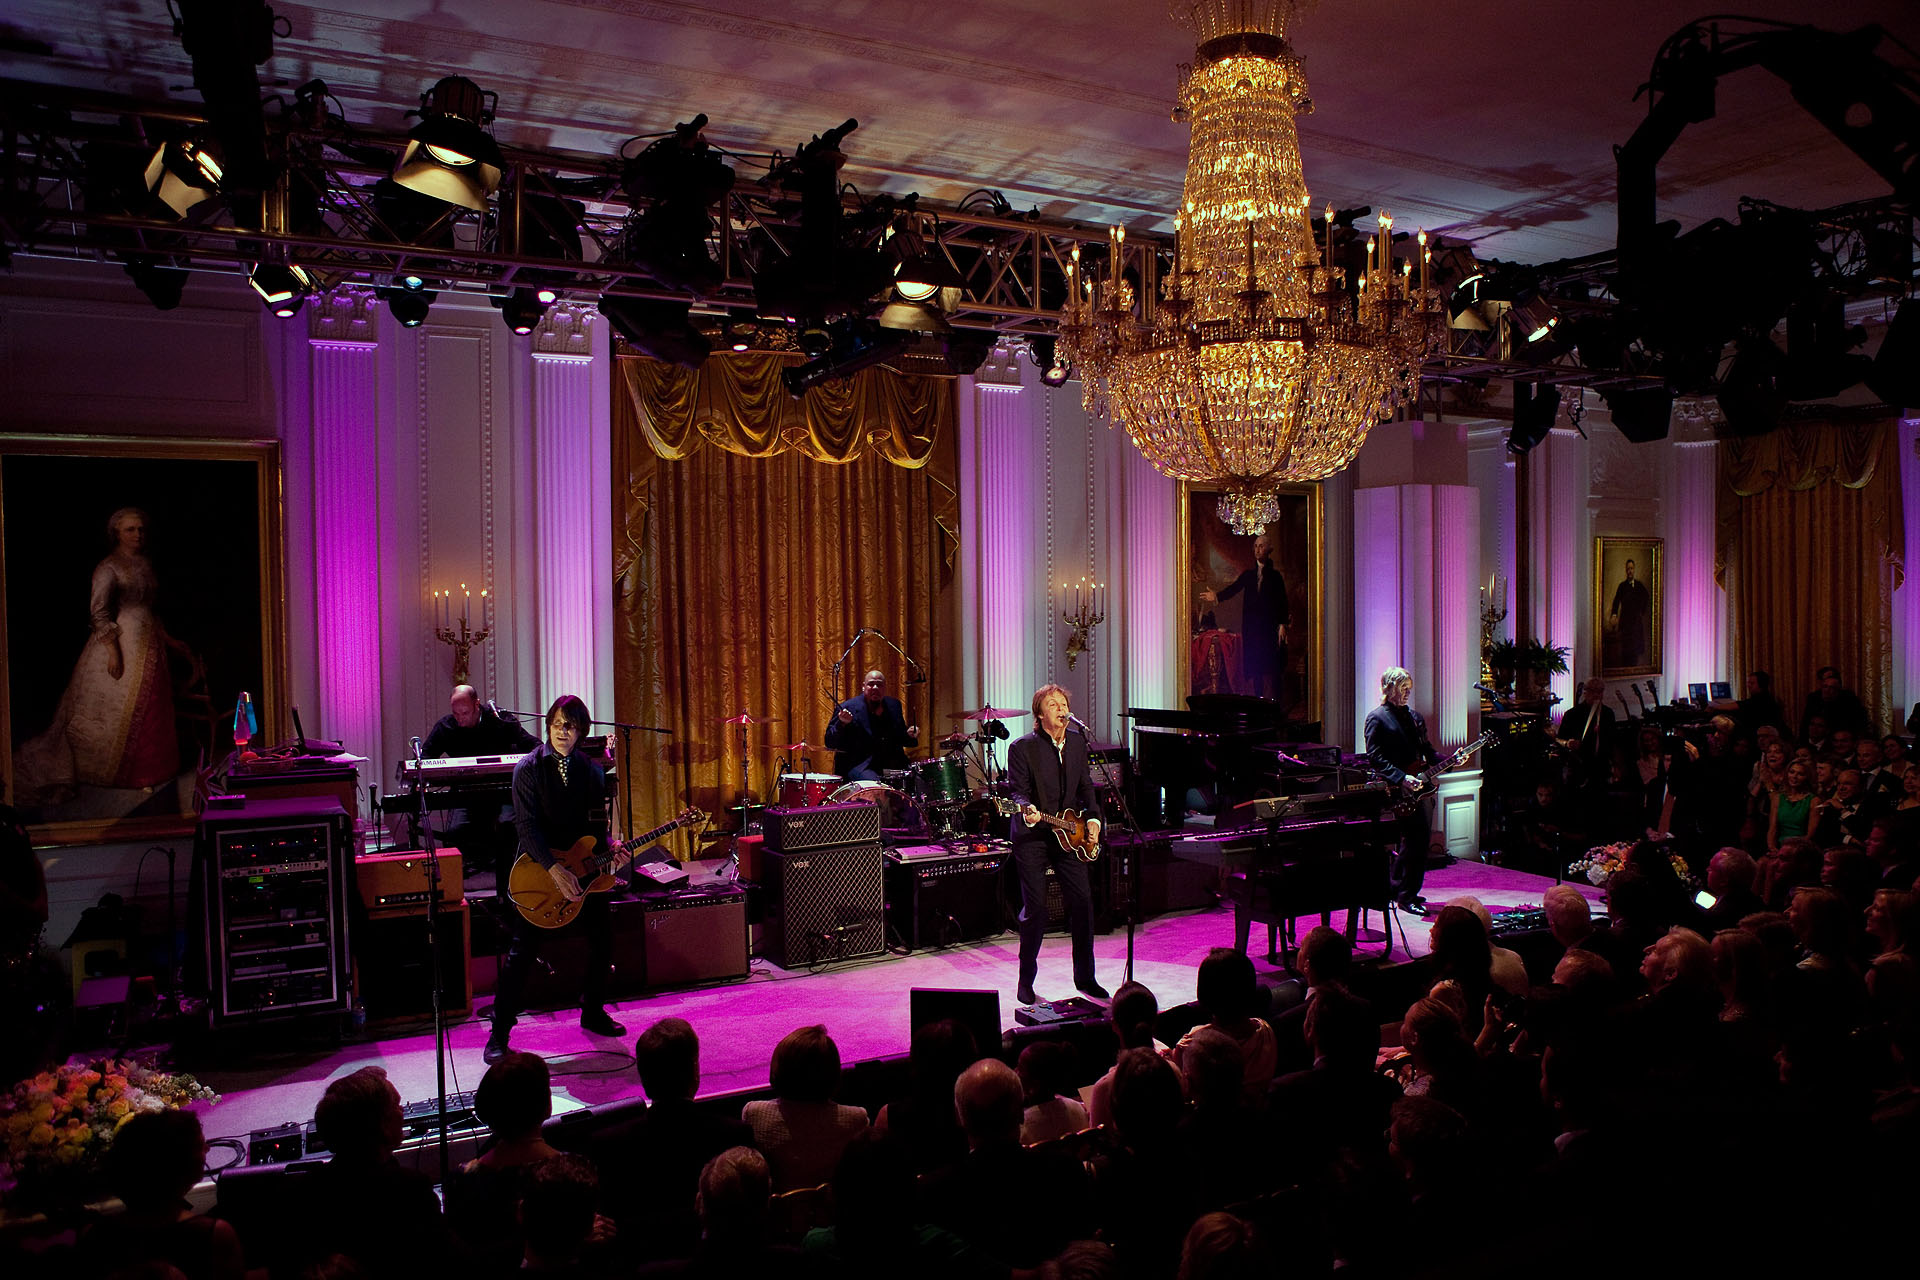 Paul McCartney, recipient of the Gershwin prize, performs in the East Room 